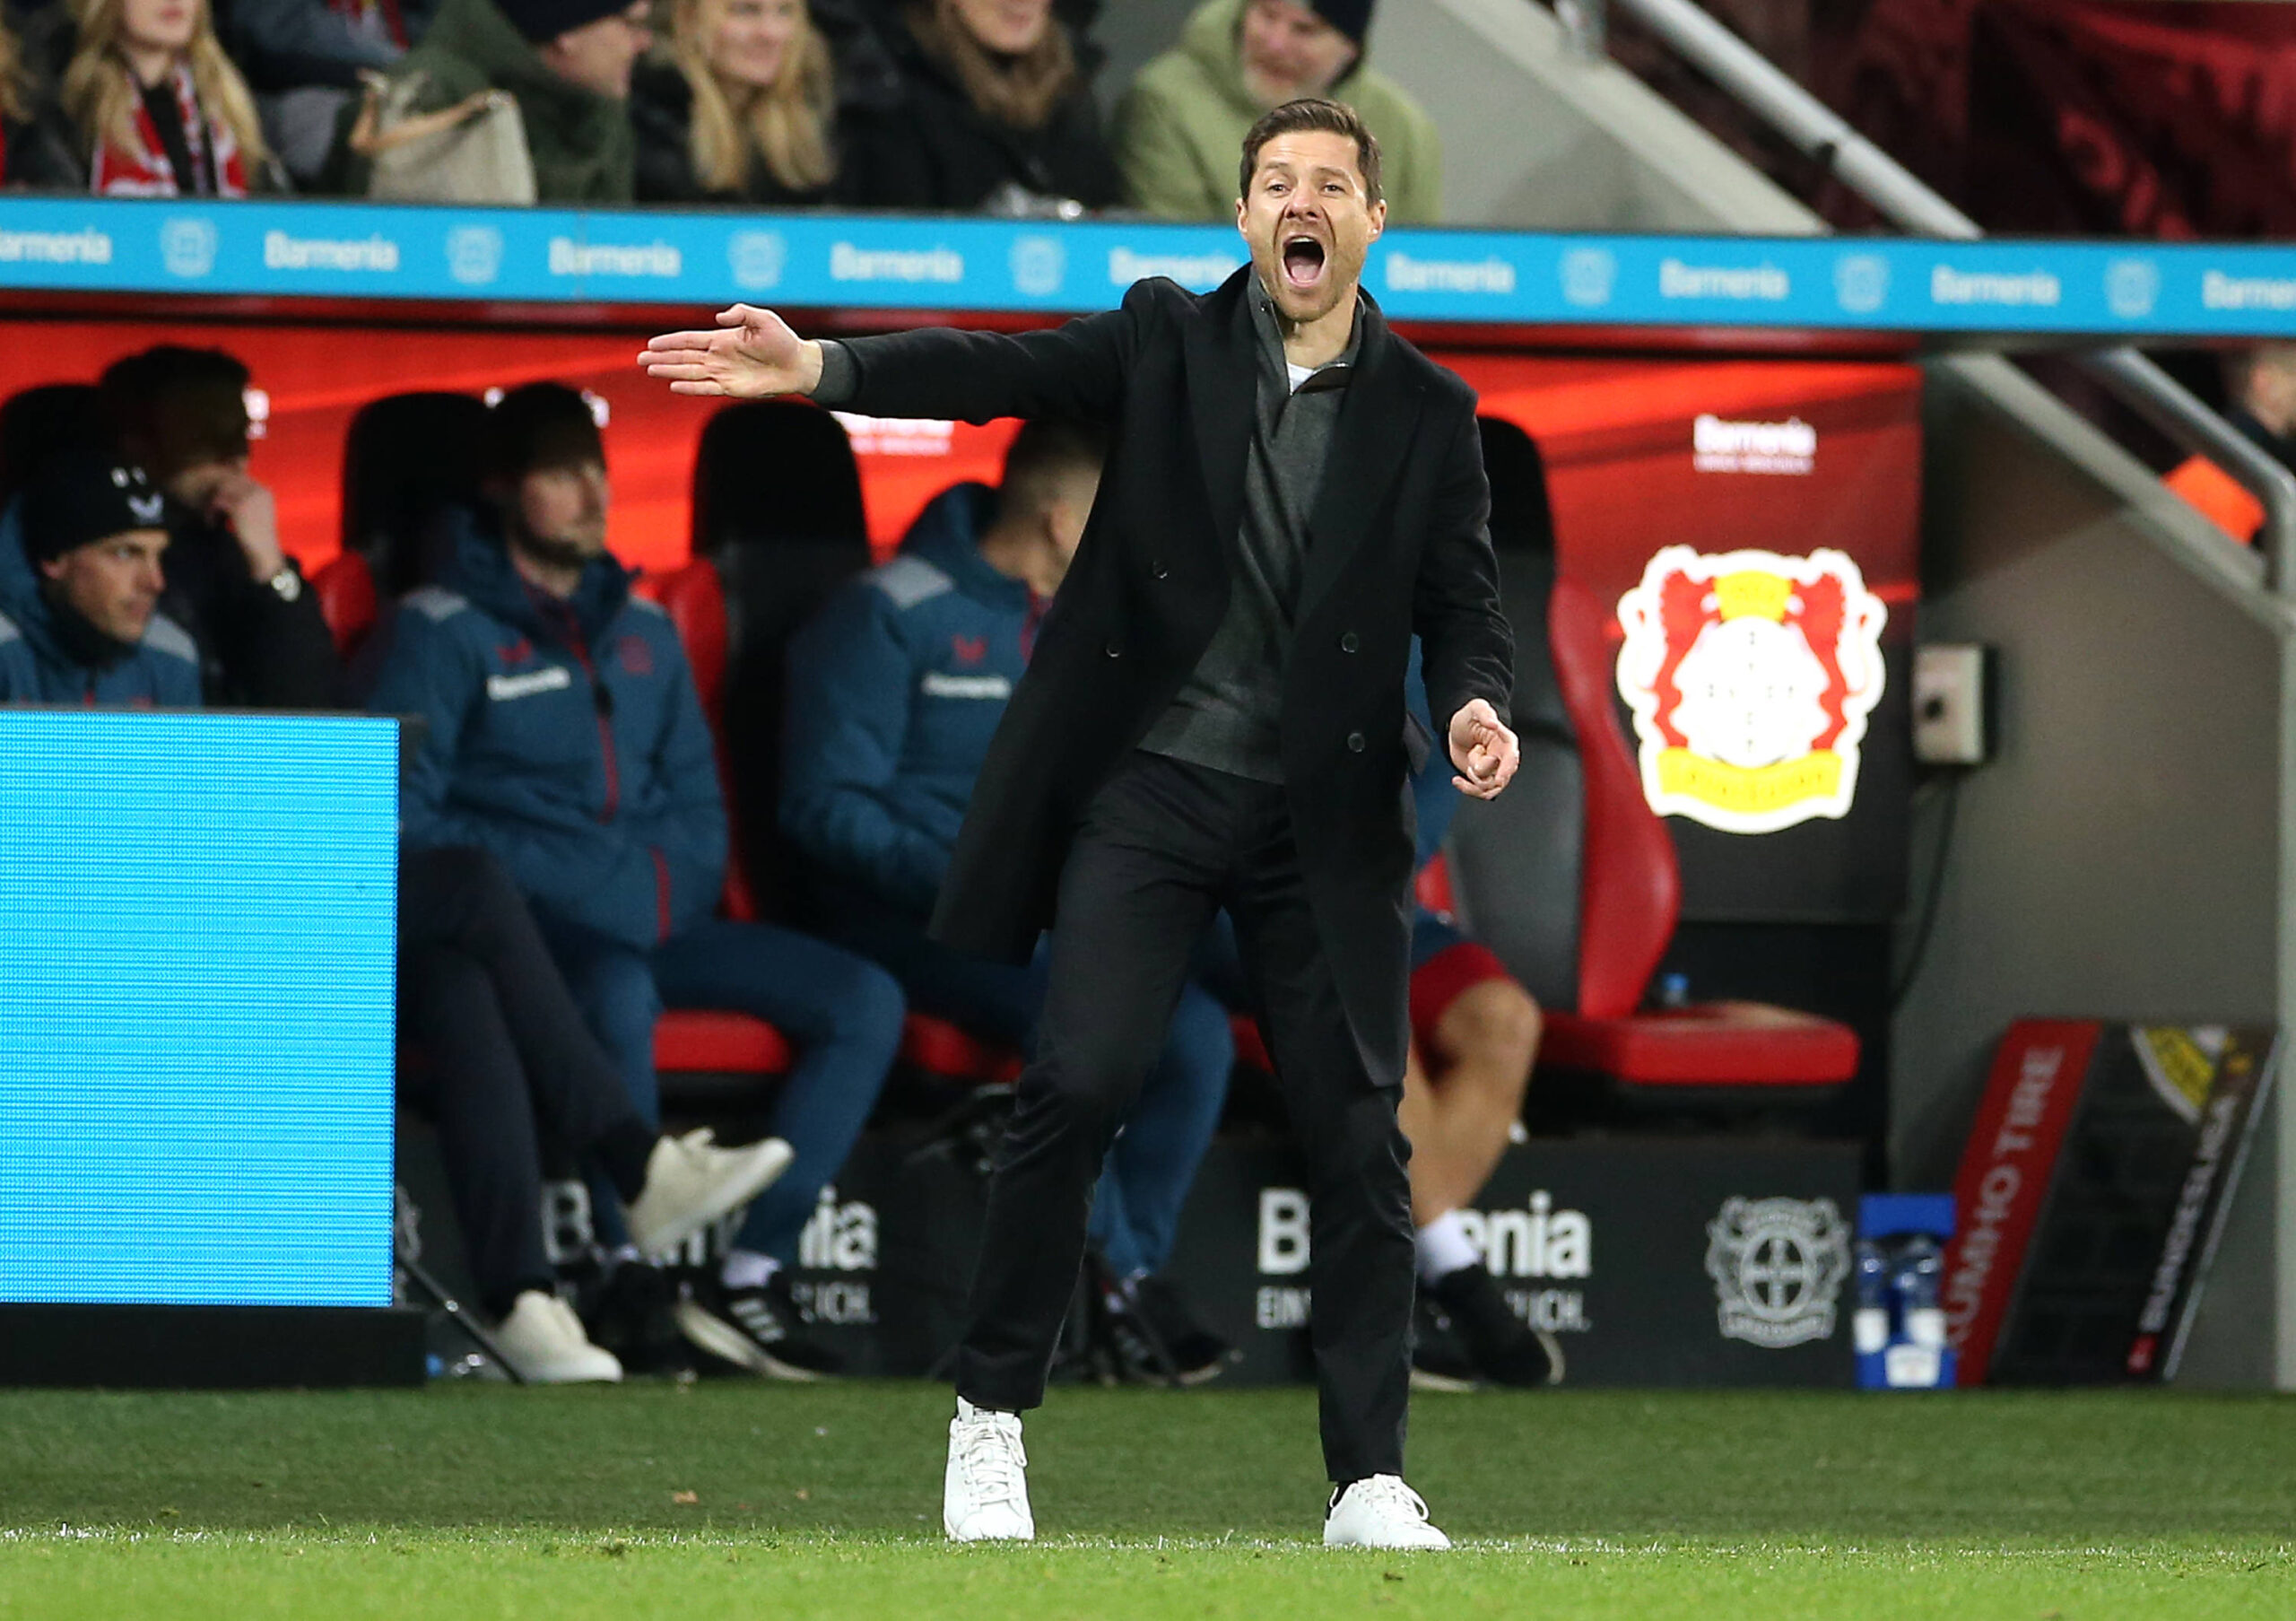 Xabi Alonso shouting instructions to his team from the sideline